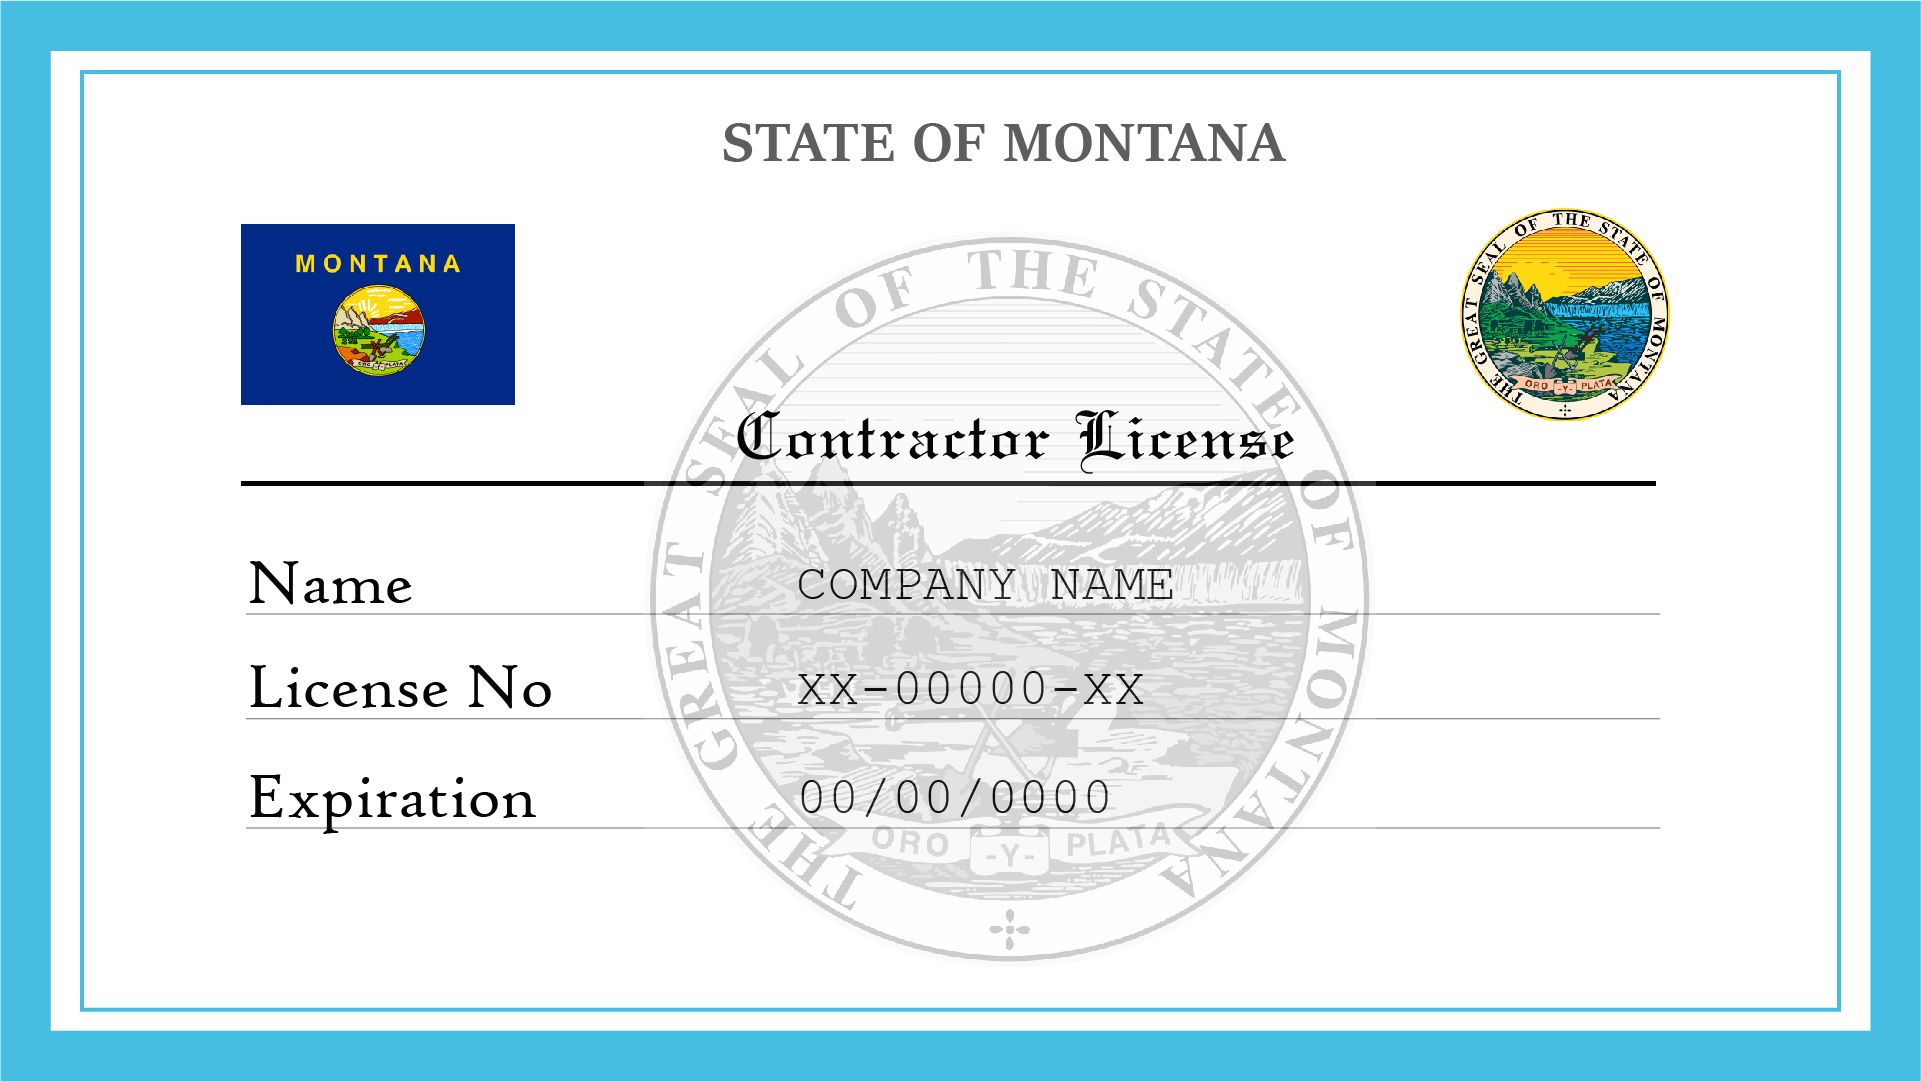 Montana residential appliance installer license prep class download the new version for apple